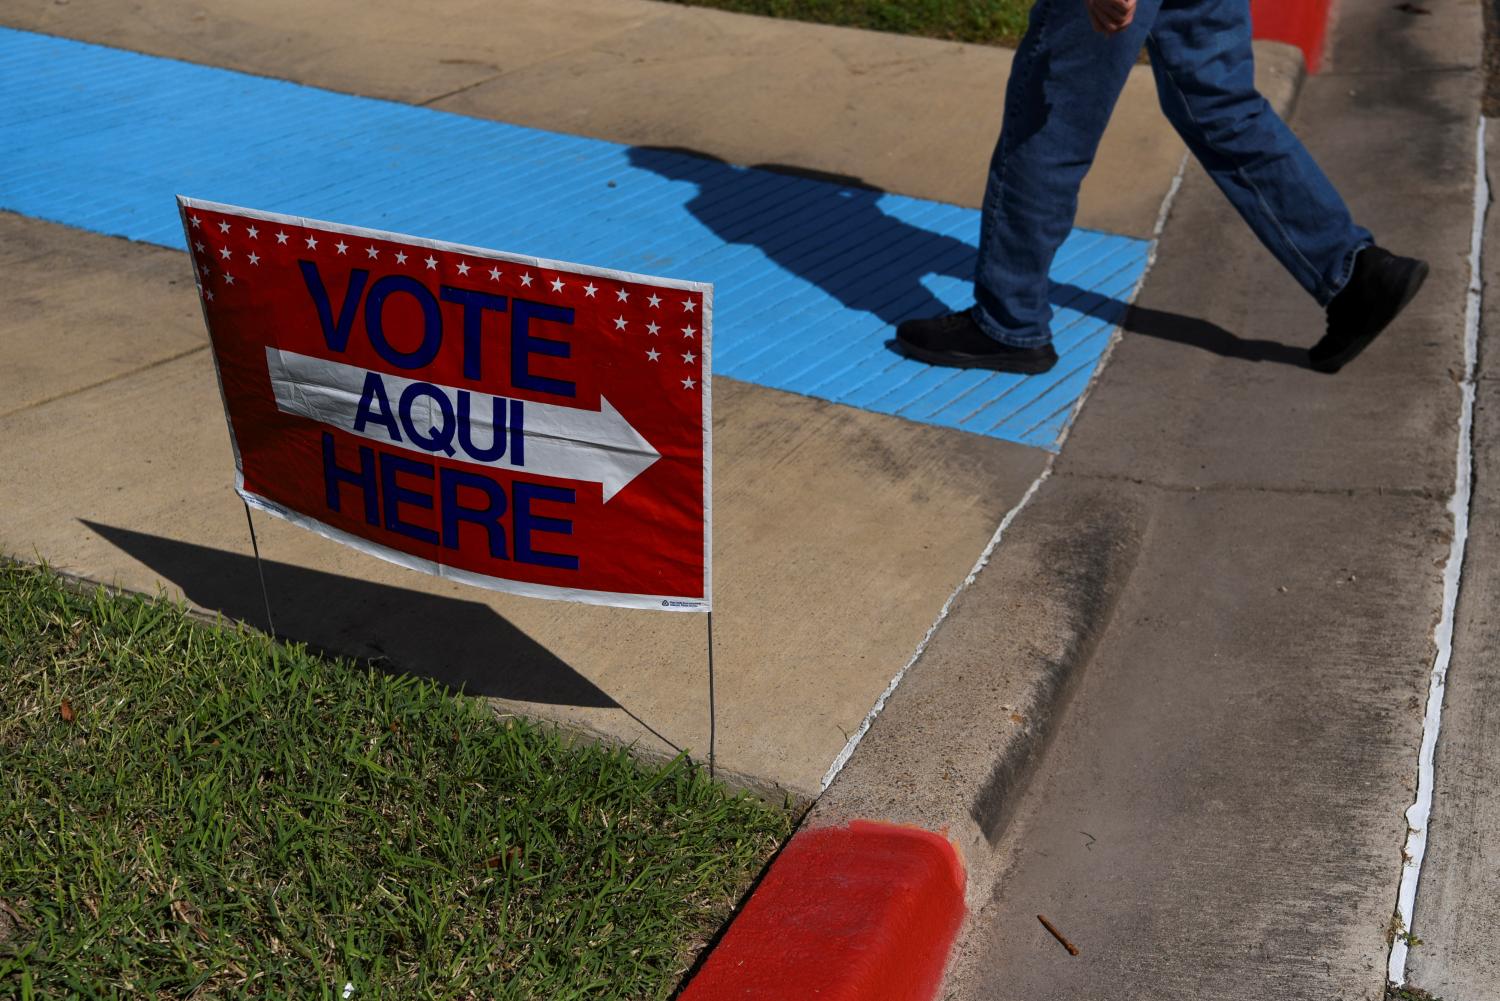 A voter walks past a sign during the 2022 midterm elections, in Harlingen, Texas, U.S., November 8, 2022.  REUTERS/Callaghan O'Hare